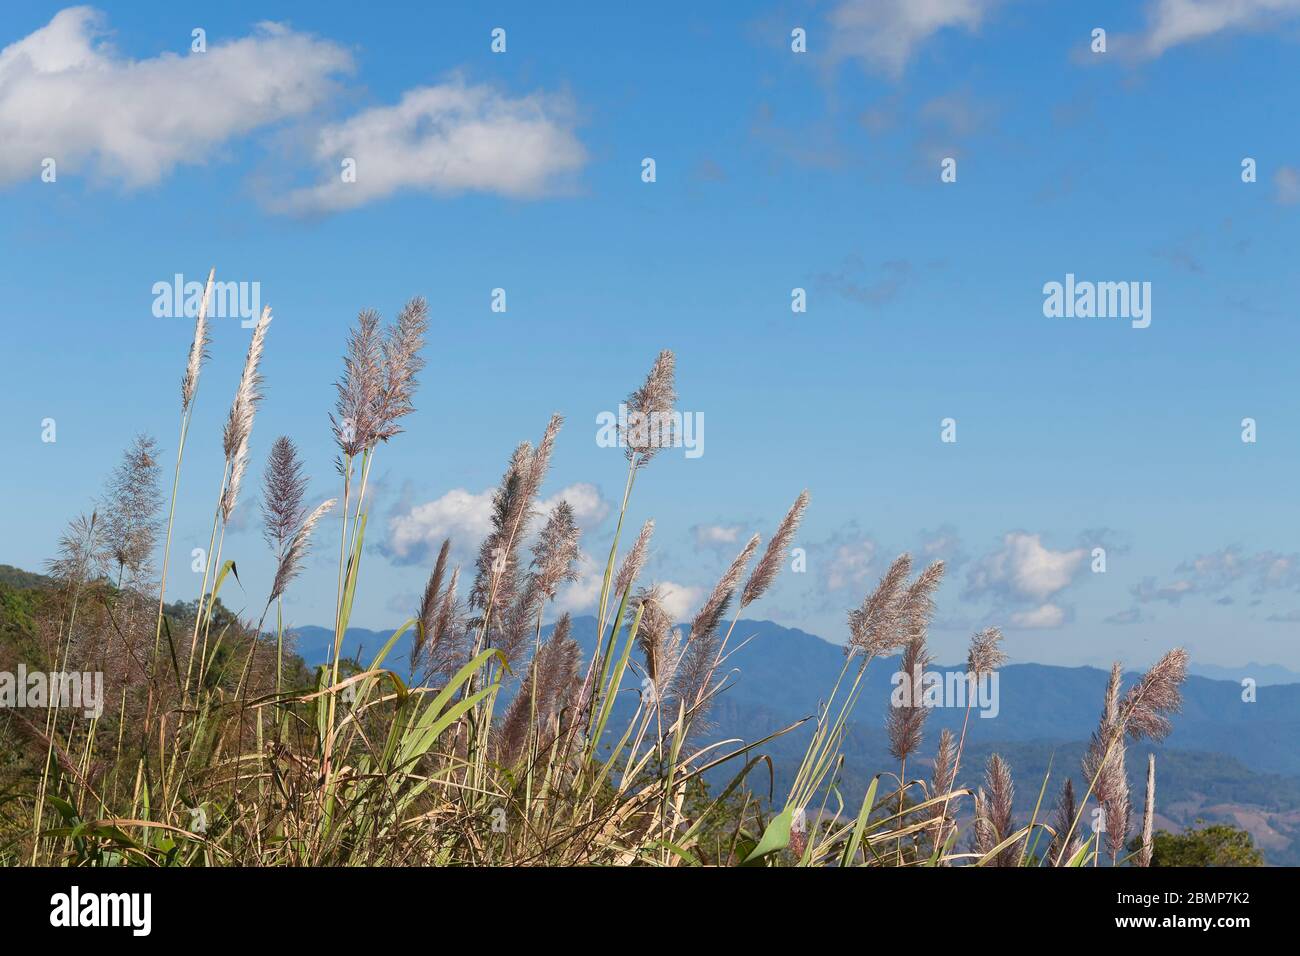 Cortaderia selloana, commonly known as pampas grass Stock Photo